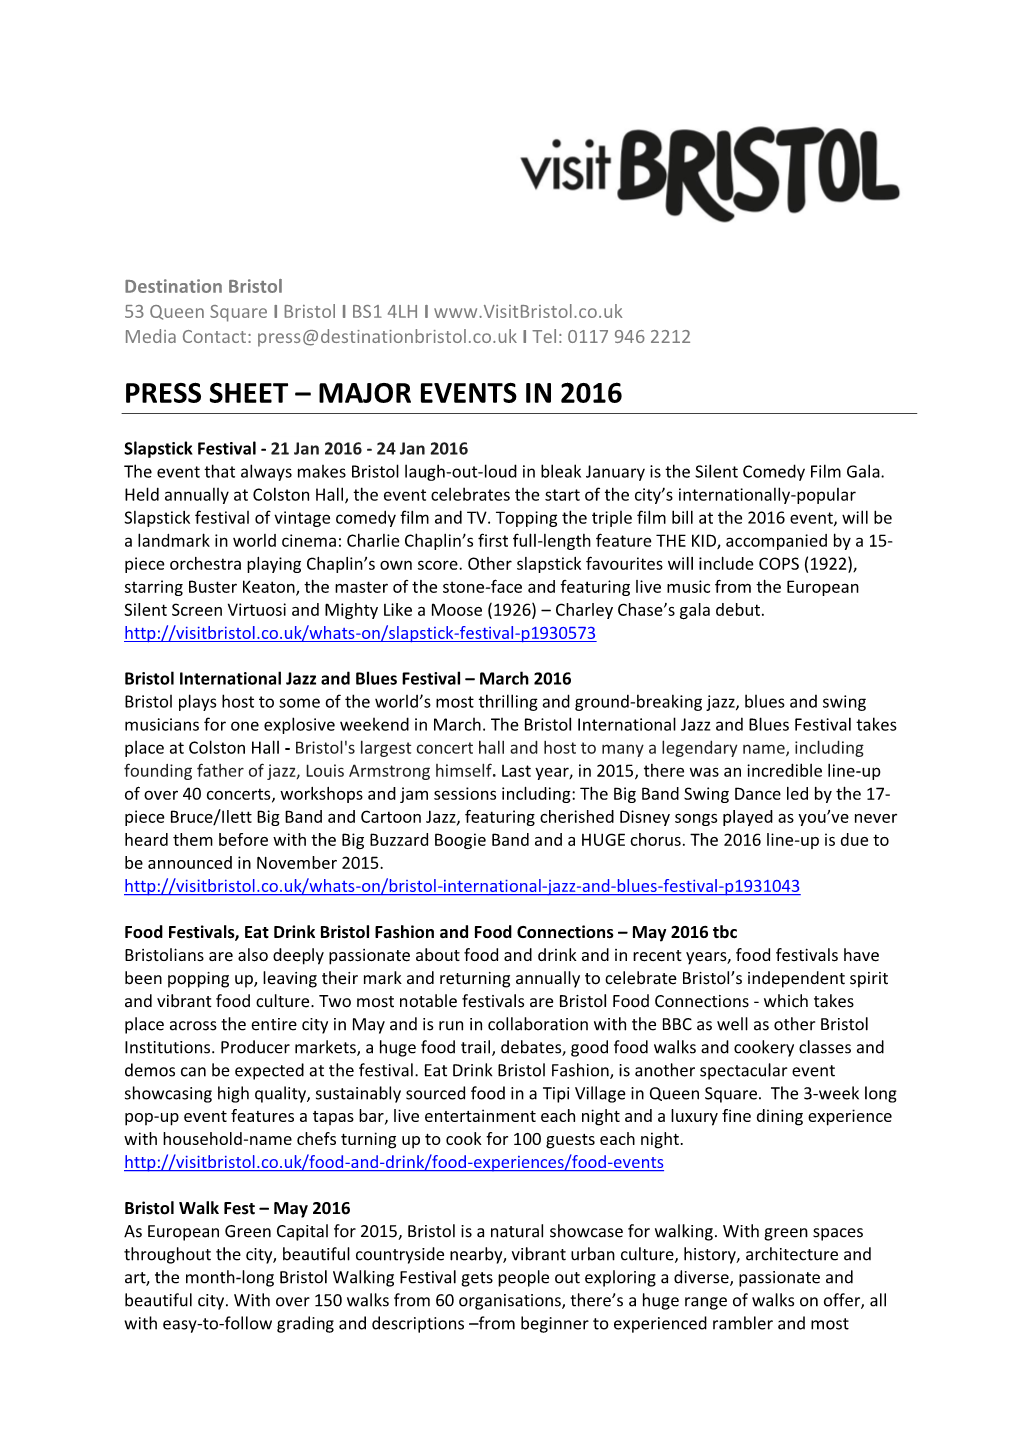 Press Sheet – Major Events in 2016